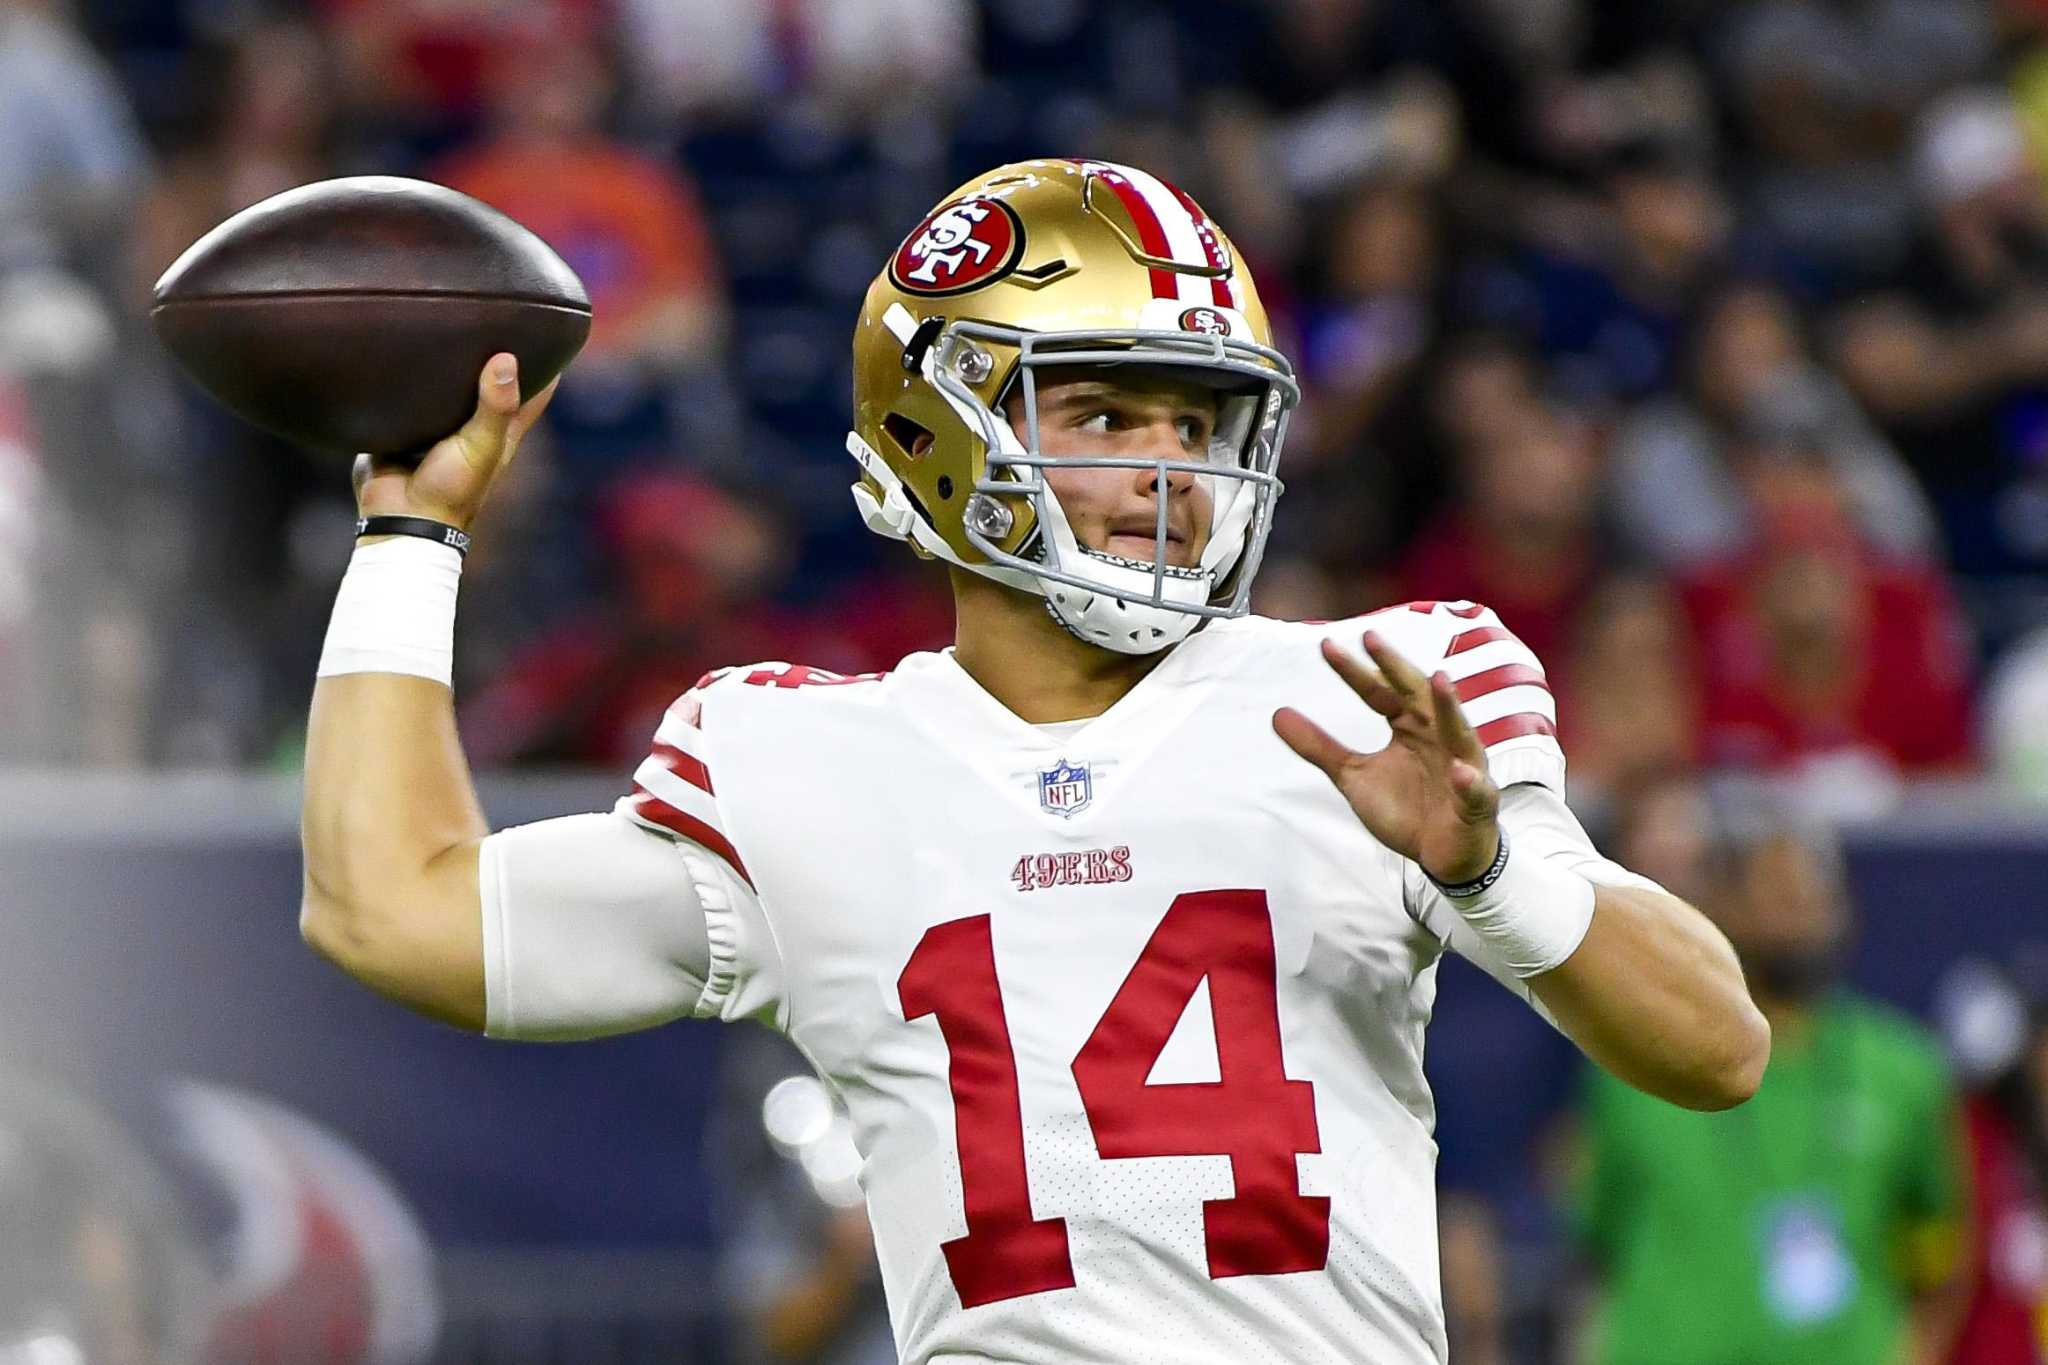 Here's a look at rookie quarterback Brock Purdy's path to 49ers